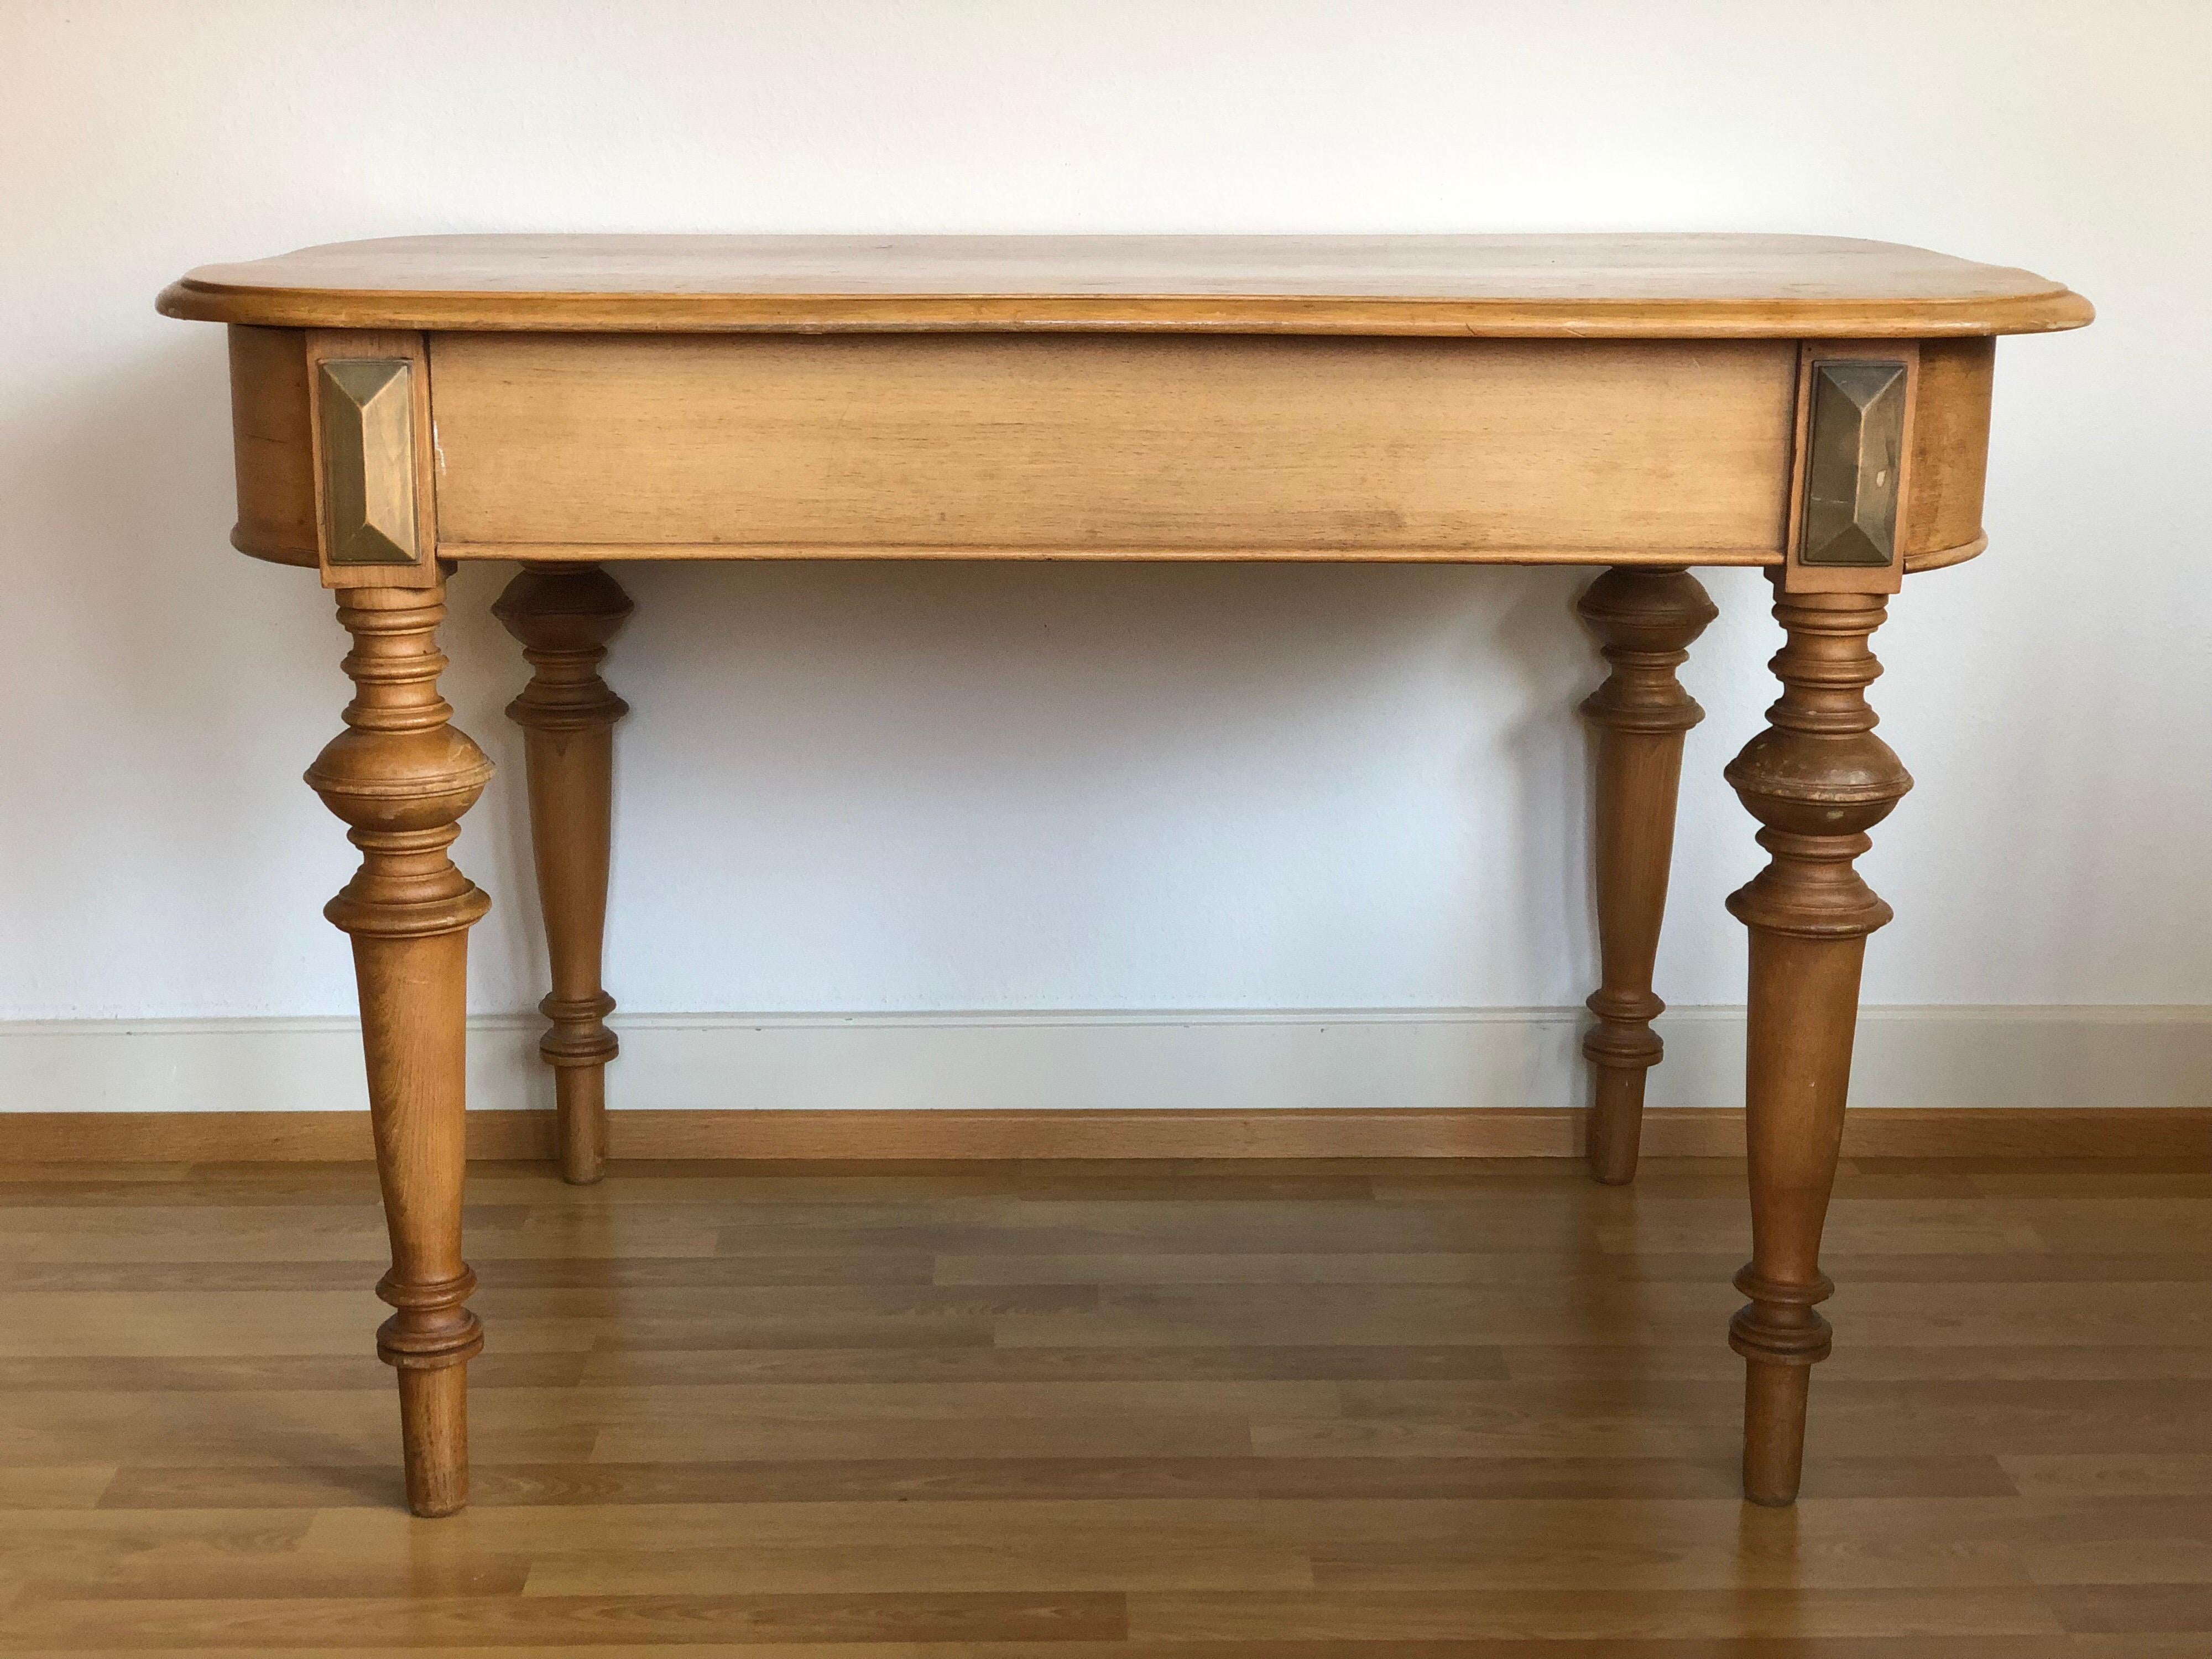 Hand-Carved Biedermeier SALE Tyrolean Farm Country Dining Table, Early 20th Century